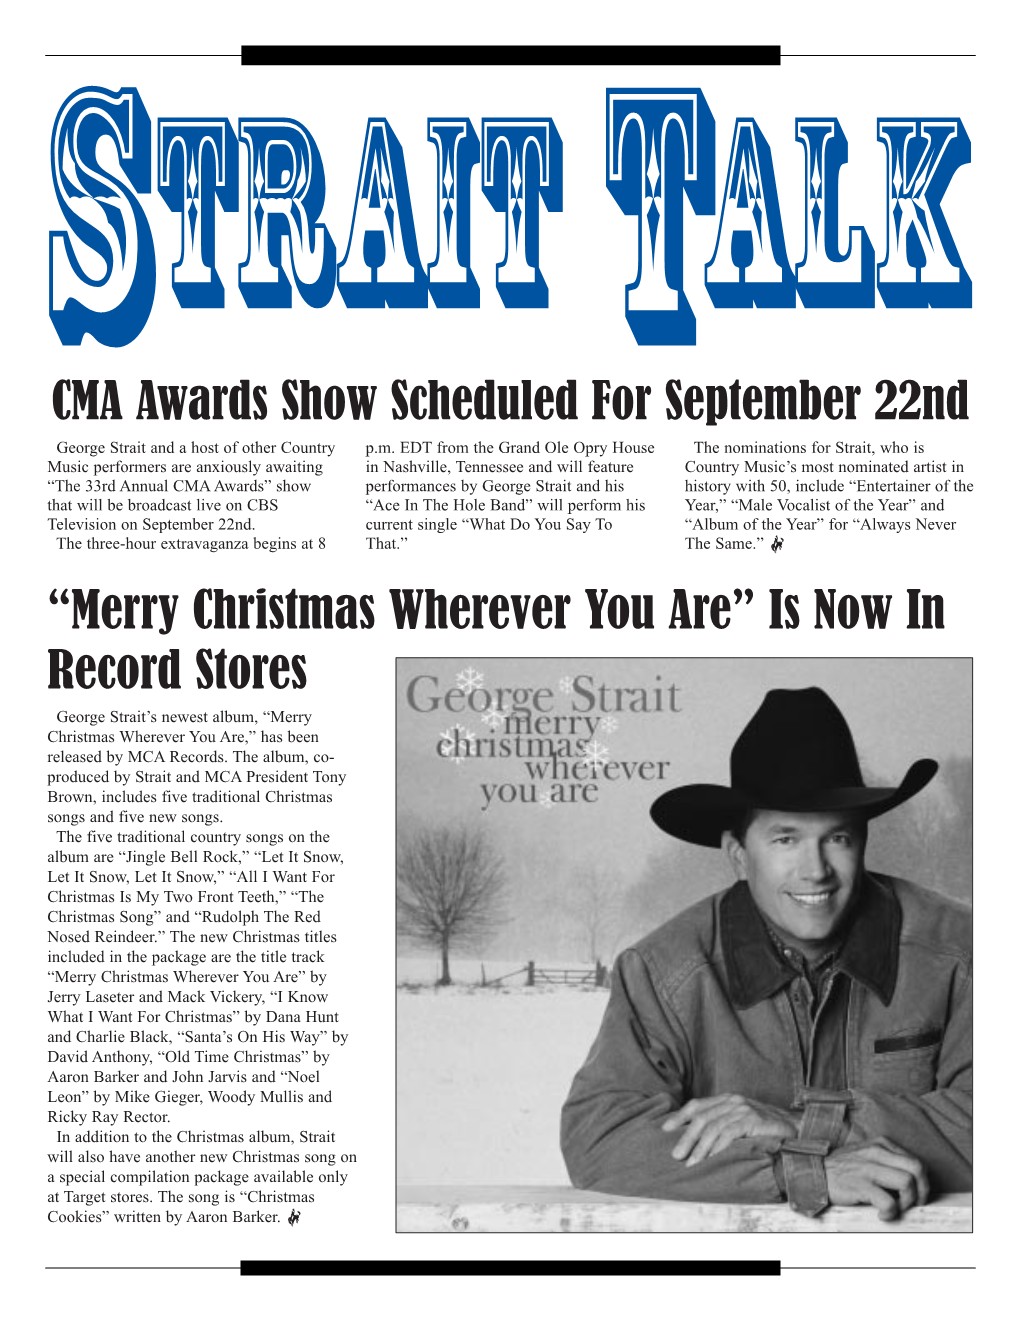 CMA Awards Show Scheduled for September 22Nd George Strait and a Host of Other Country P.M